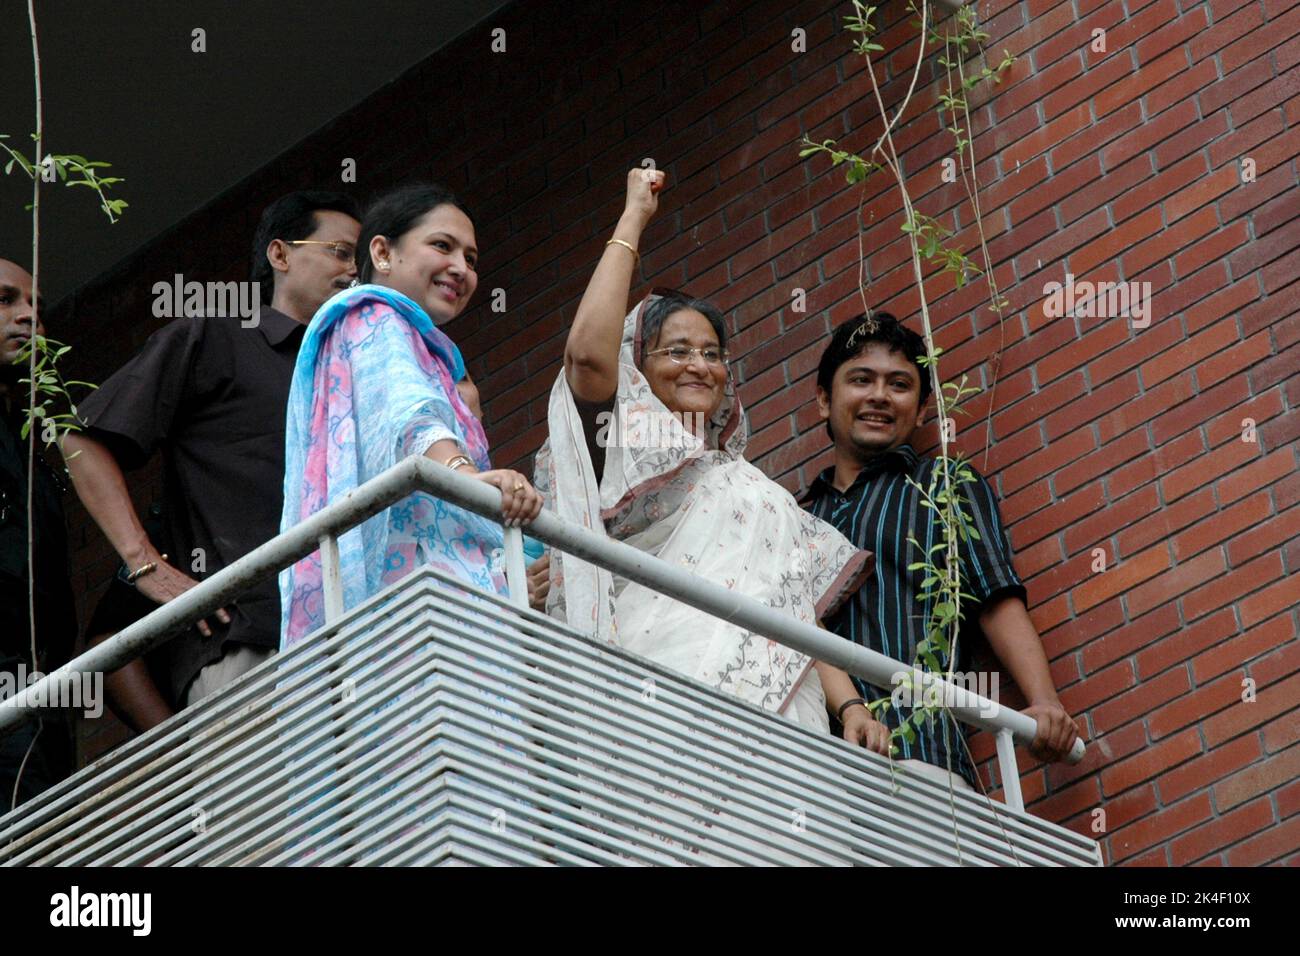 Dhaka, Bangladesh - June 11, 2008: Former Prime Minister Sheikh Hasina was released on bail and went straight from Sub jail to the Bangabandhu Memoria Stock Photo